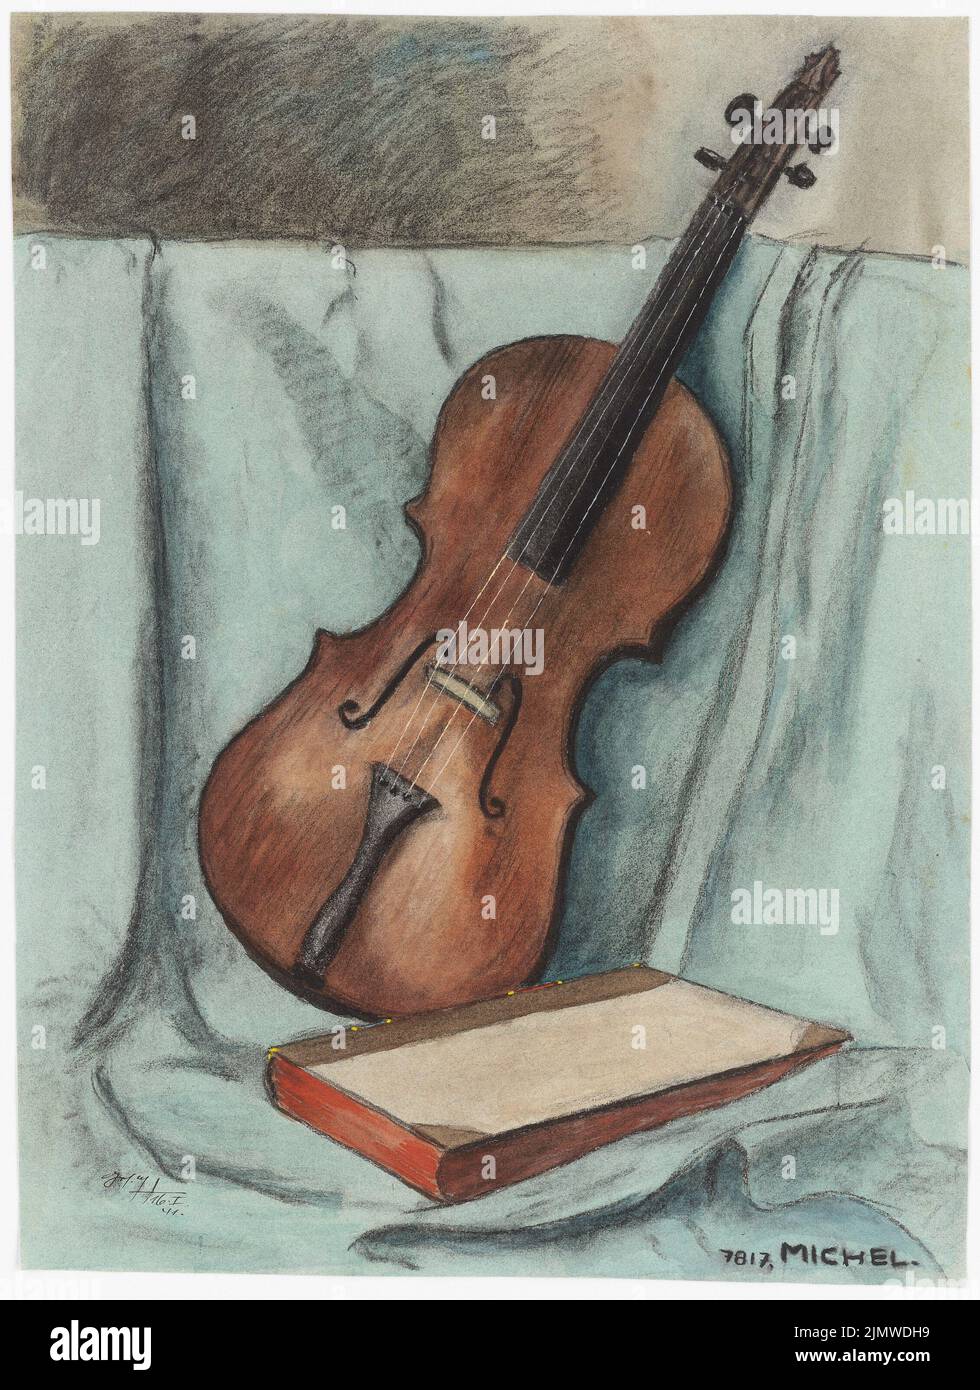 Michel Paul jun. (1922-1943), cello and book (01.03.1941): front view diagonally to the right on draped turquoise cloth based cello (with a broken neck?) Behind brown book. Coal watercolor on paper, 61.3 x 46.3 cm (including scan edges) Michel Paul jun.  (1922-1943): Cello und Buch Stock Photo